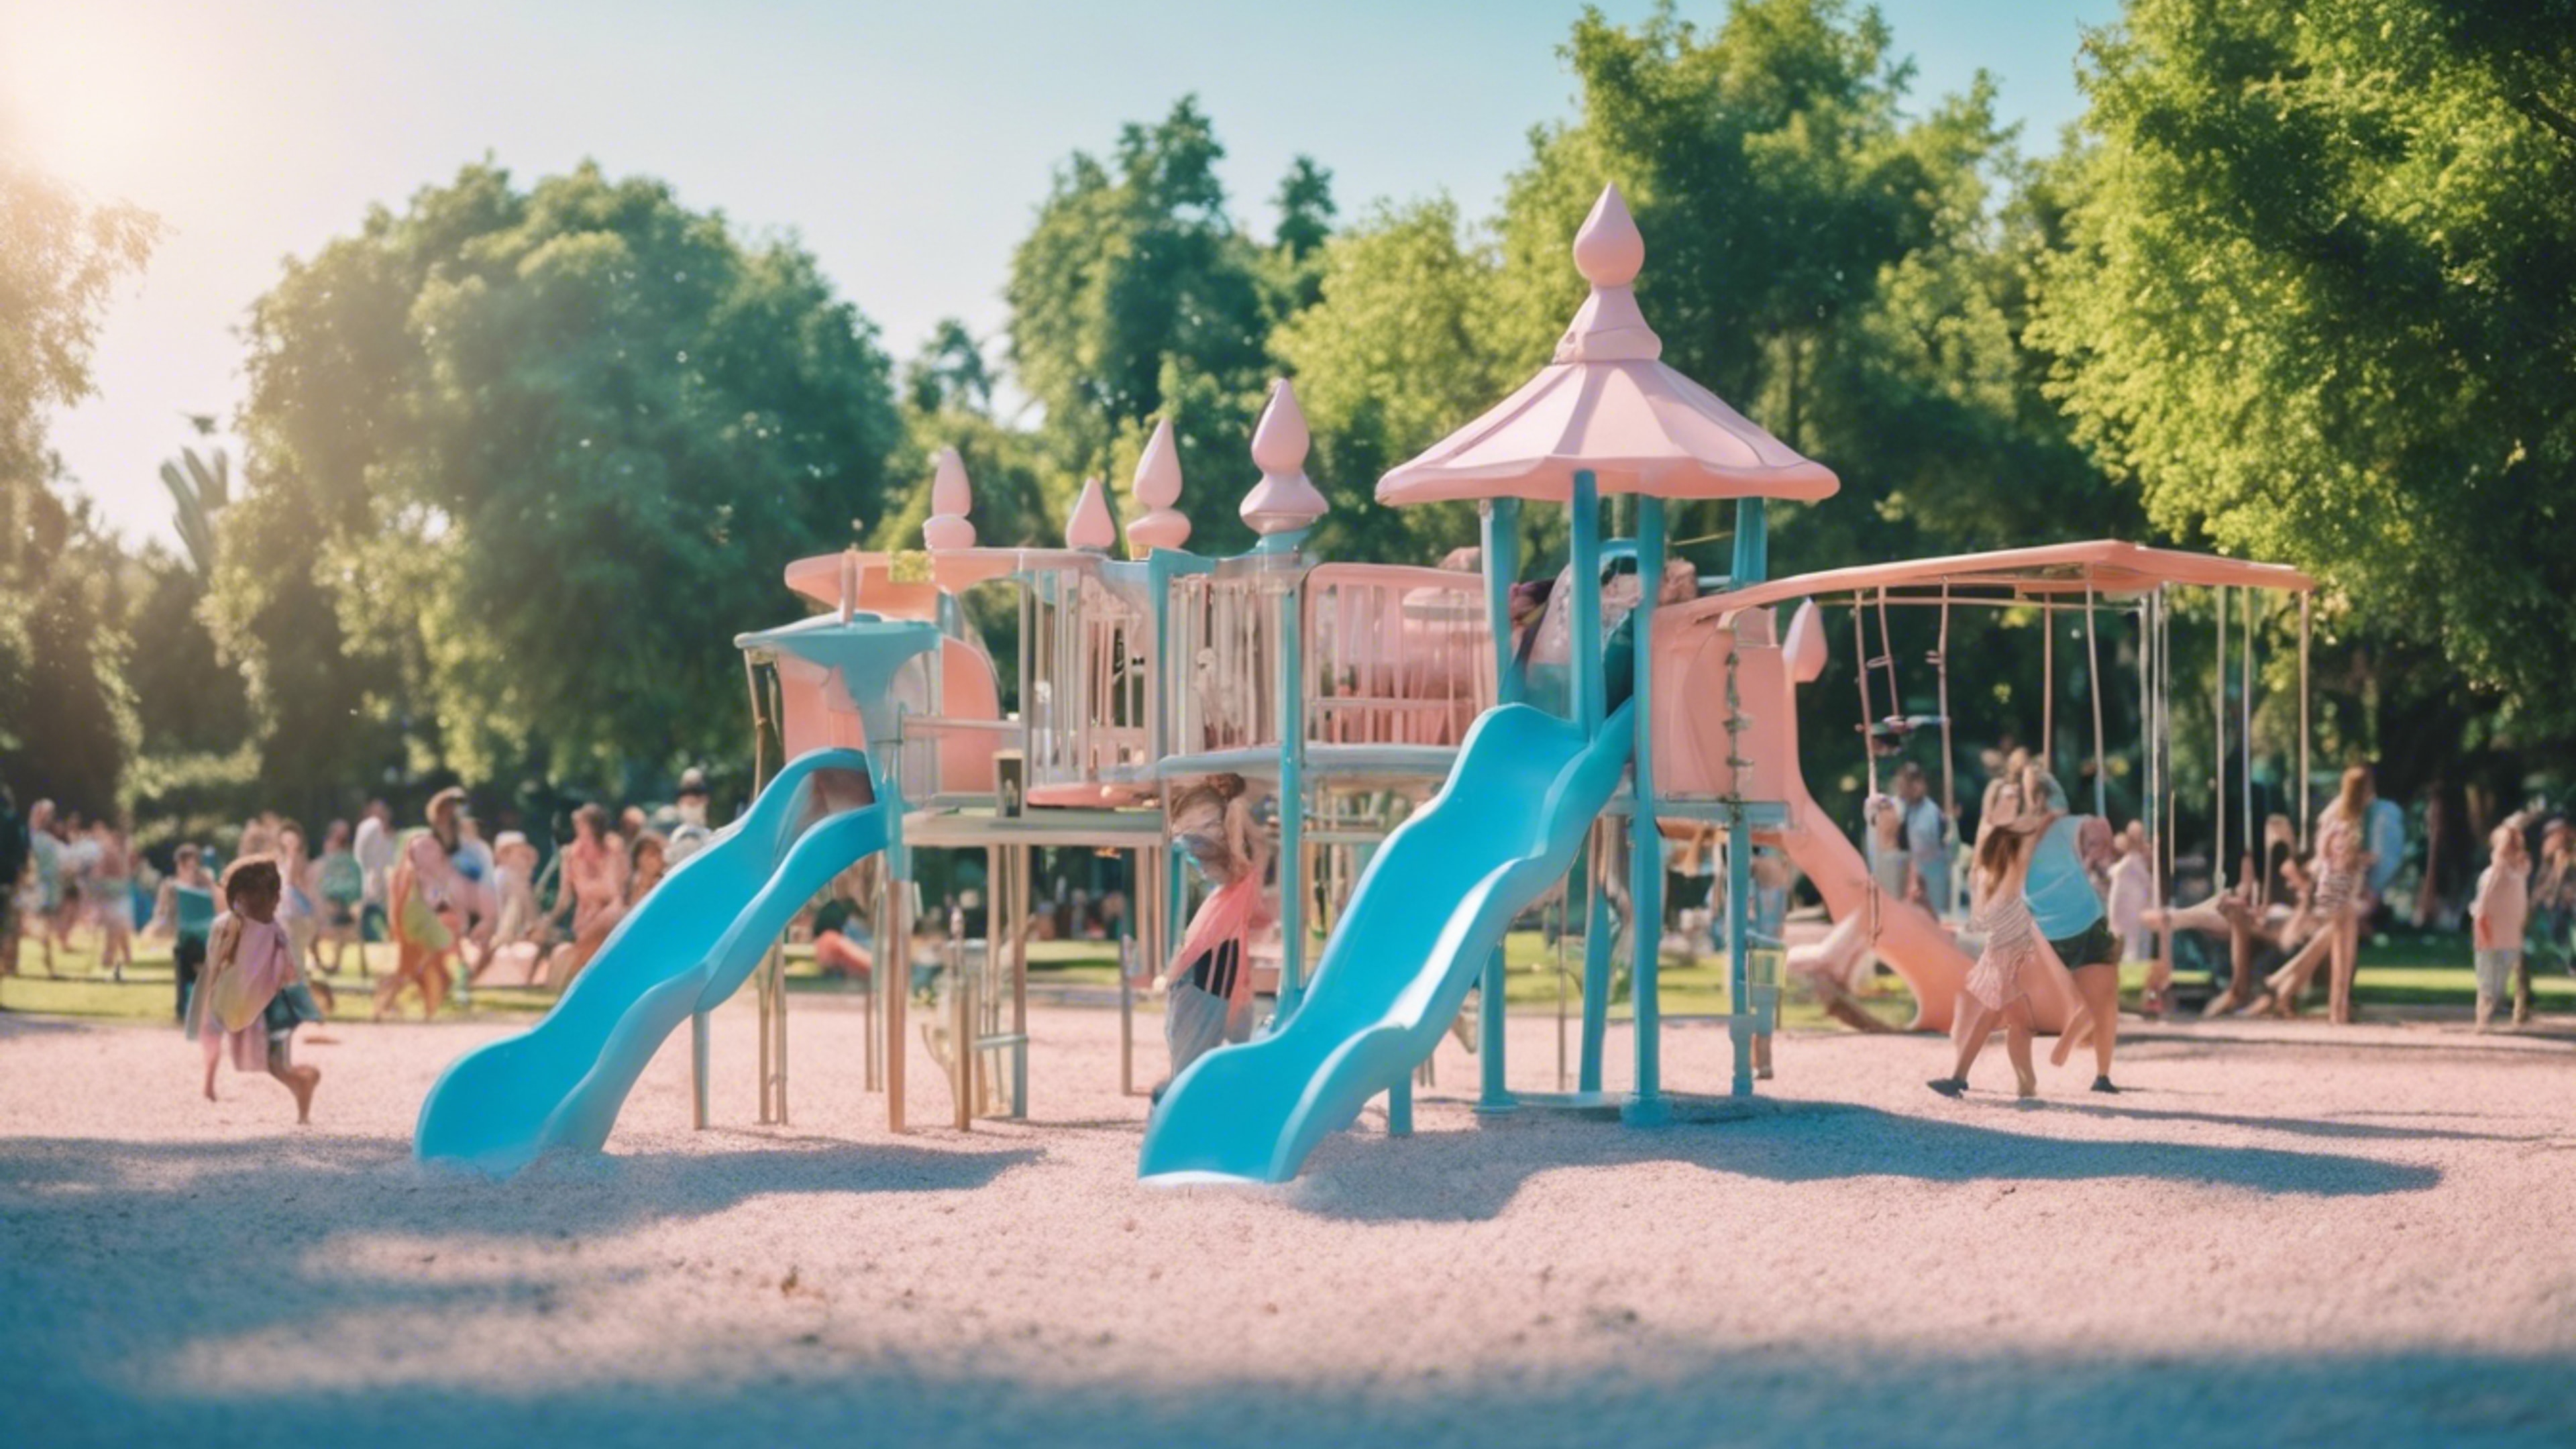 A bright pastel blue playground in a lively public park, bustling with kids. ورق الجدران[d7bf1102c17e4700a3c3]